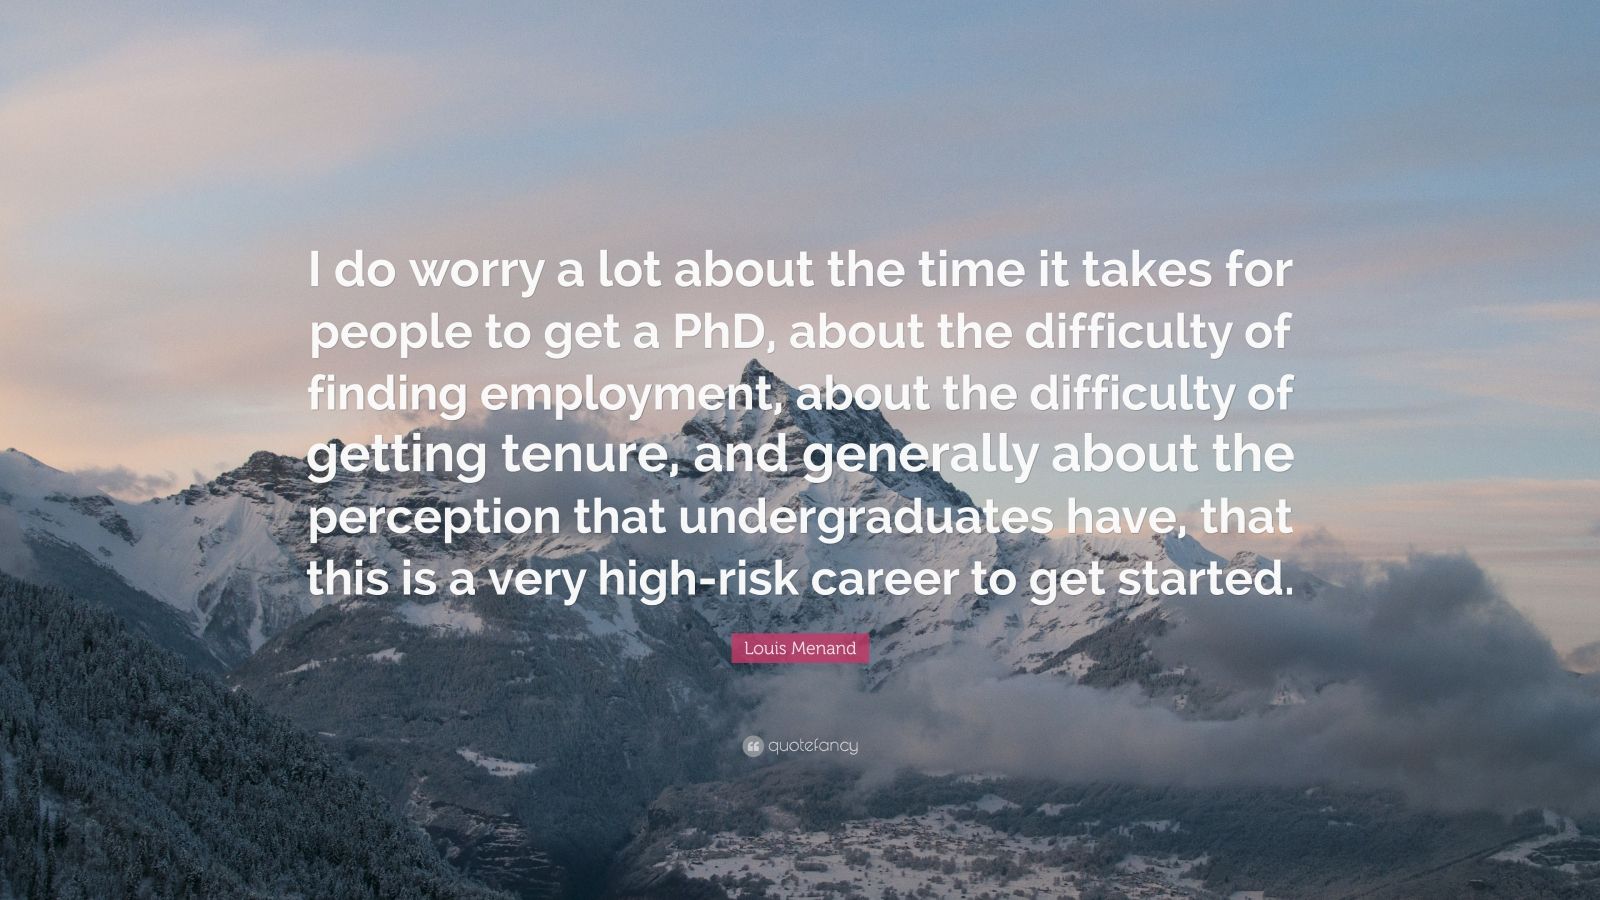 Louis Menand Quote: “I do worry a lot about the time it takes for people to get a PhD, about the ...